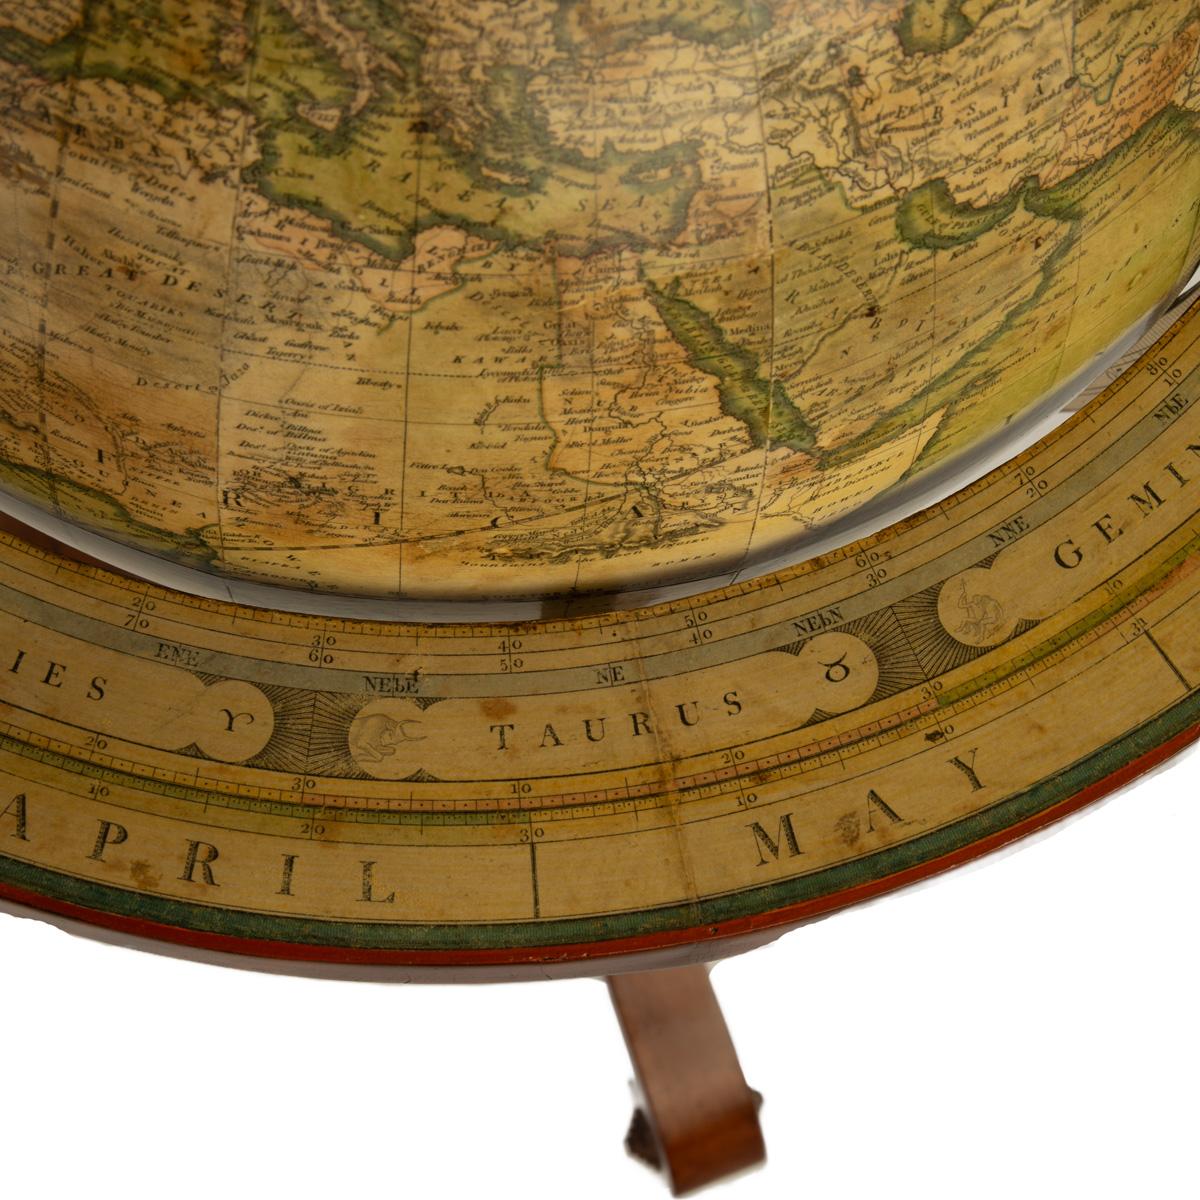 A Cary’s 15 inch terrestrial globe 1849 For Sale 4